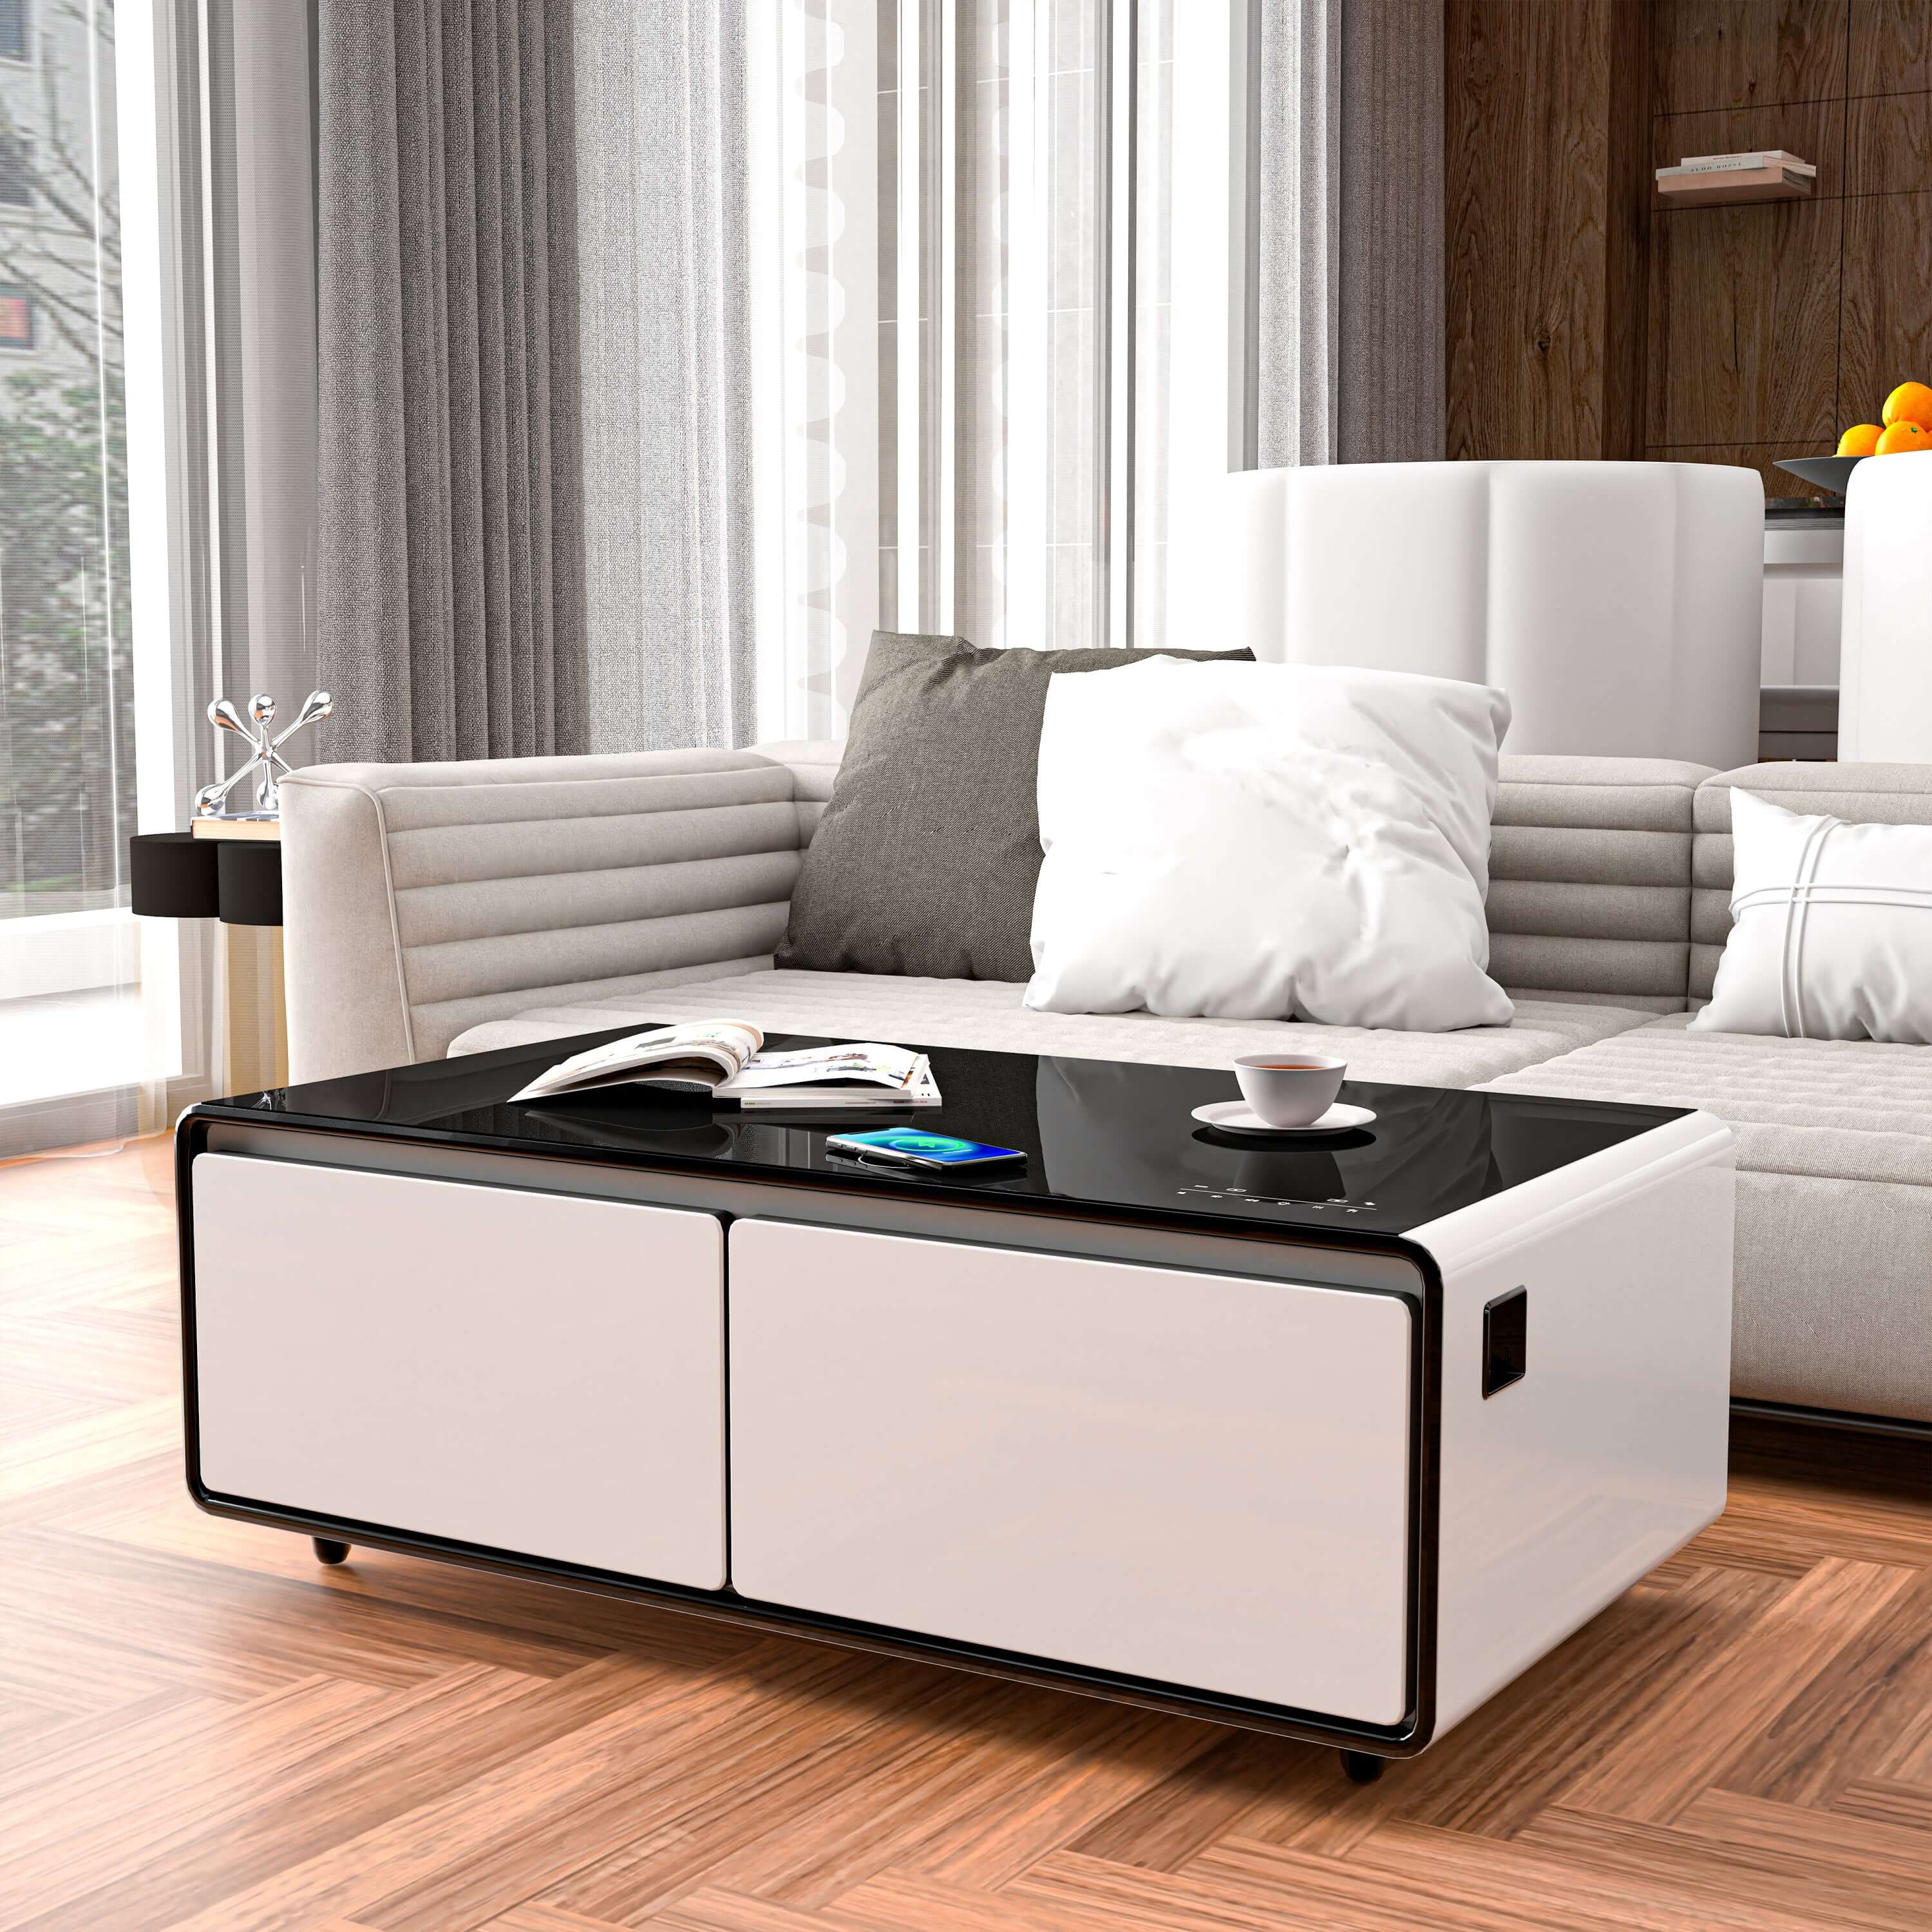 Smart Coffee Table with Built-in Fridge, Bluetooth Speaker, Wireless Charging